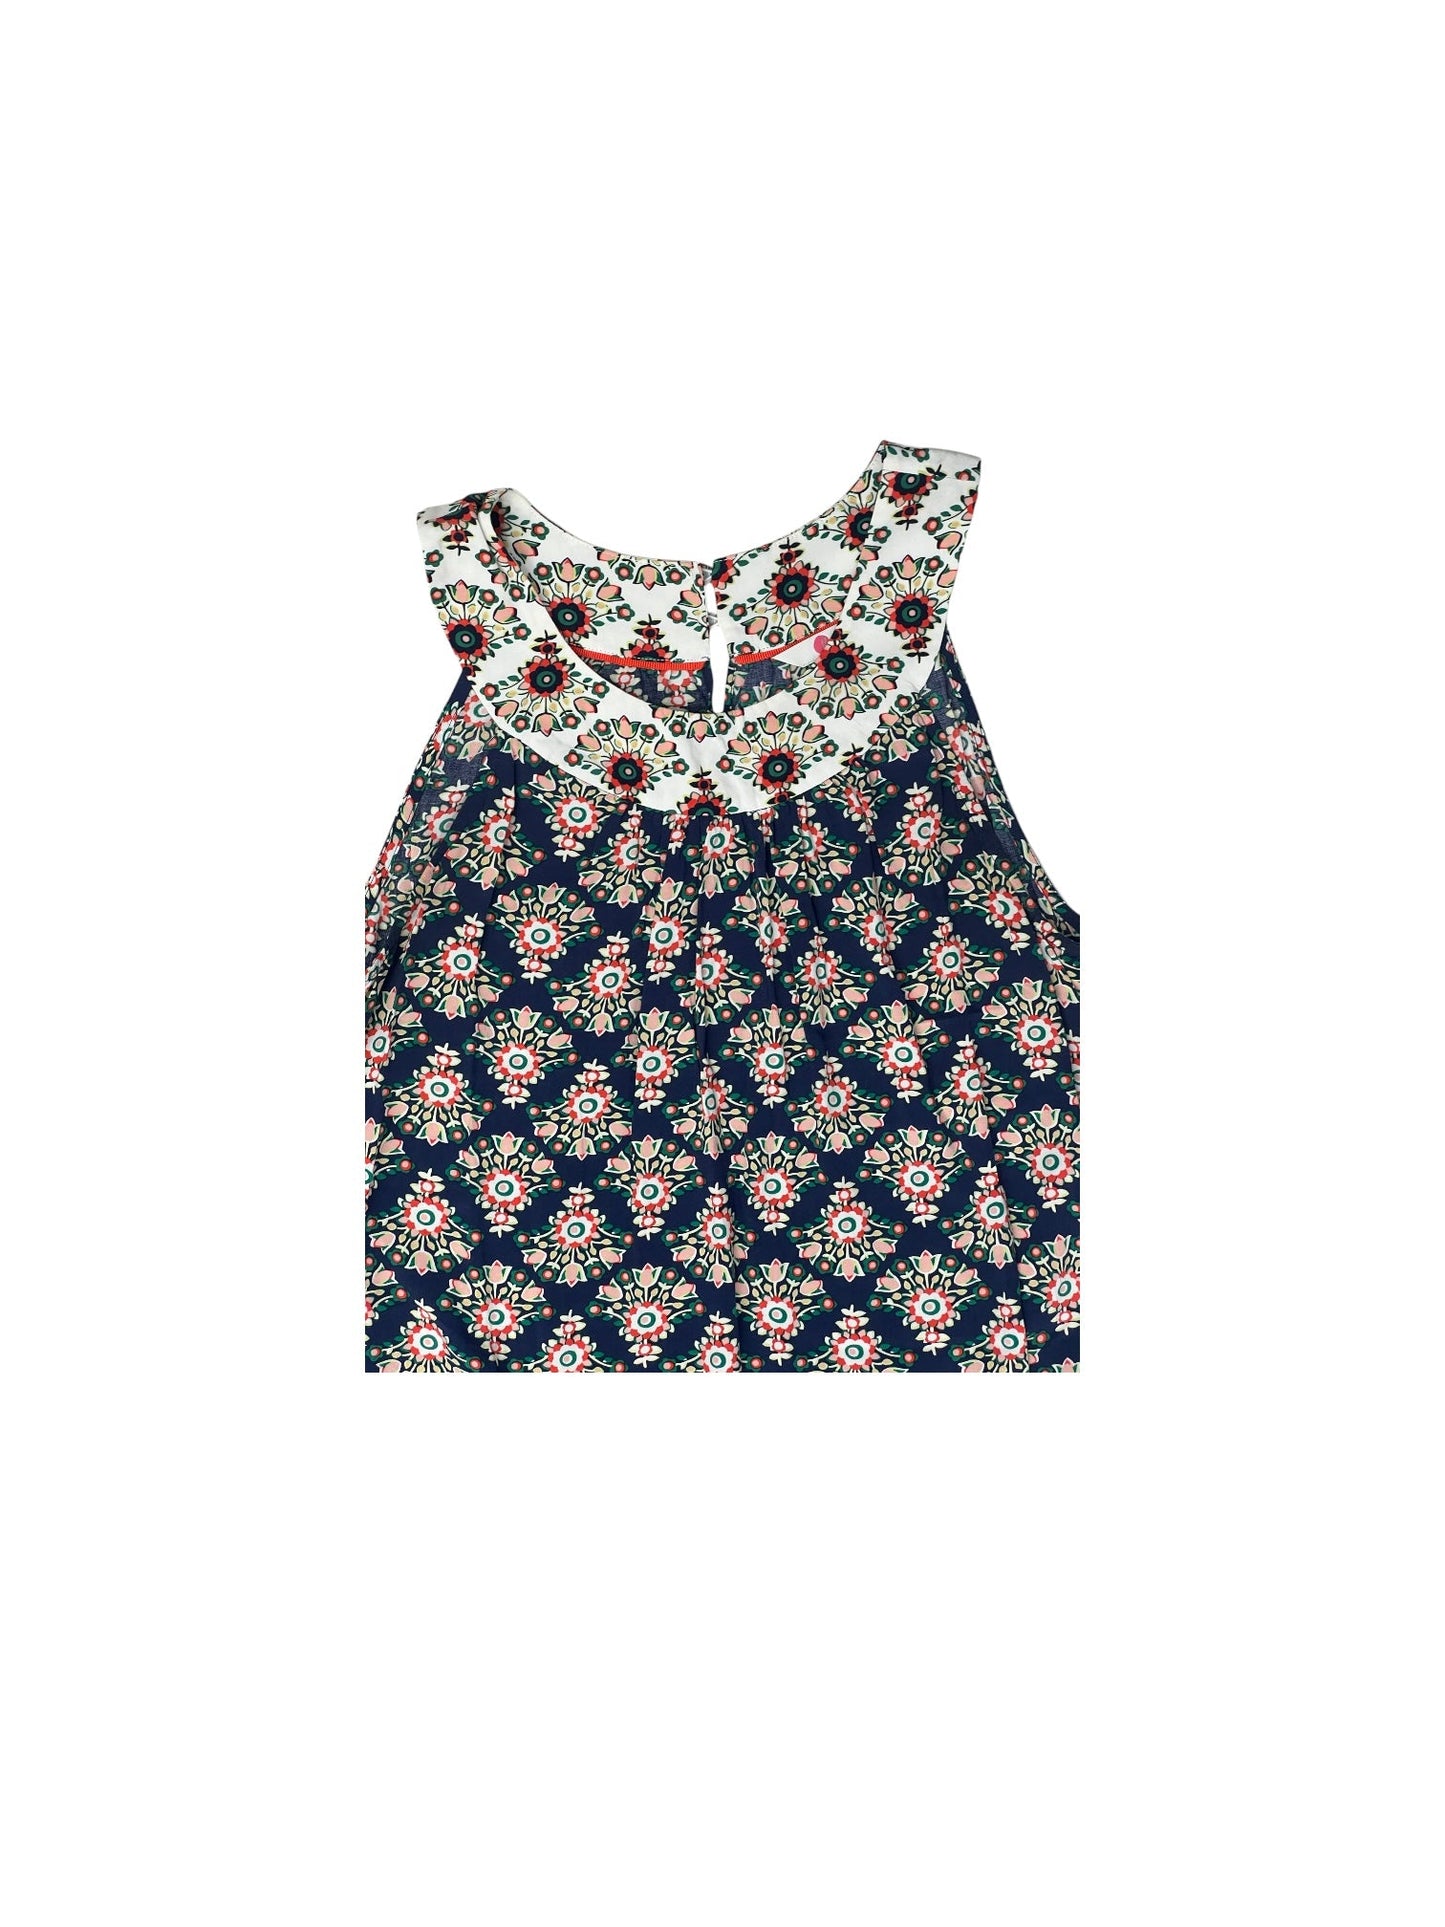 Top Sleeveless By Boden  Size: 6